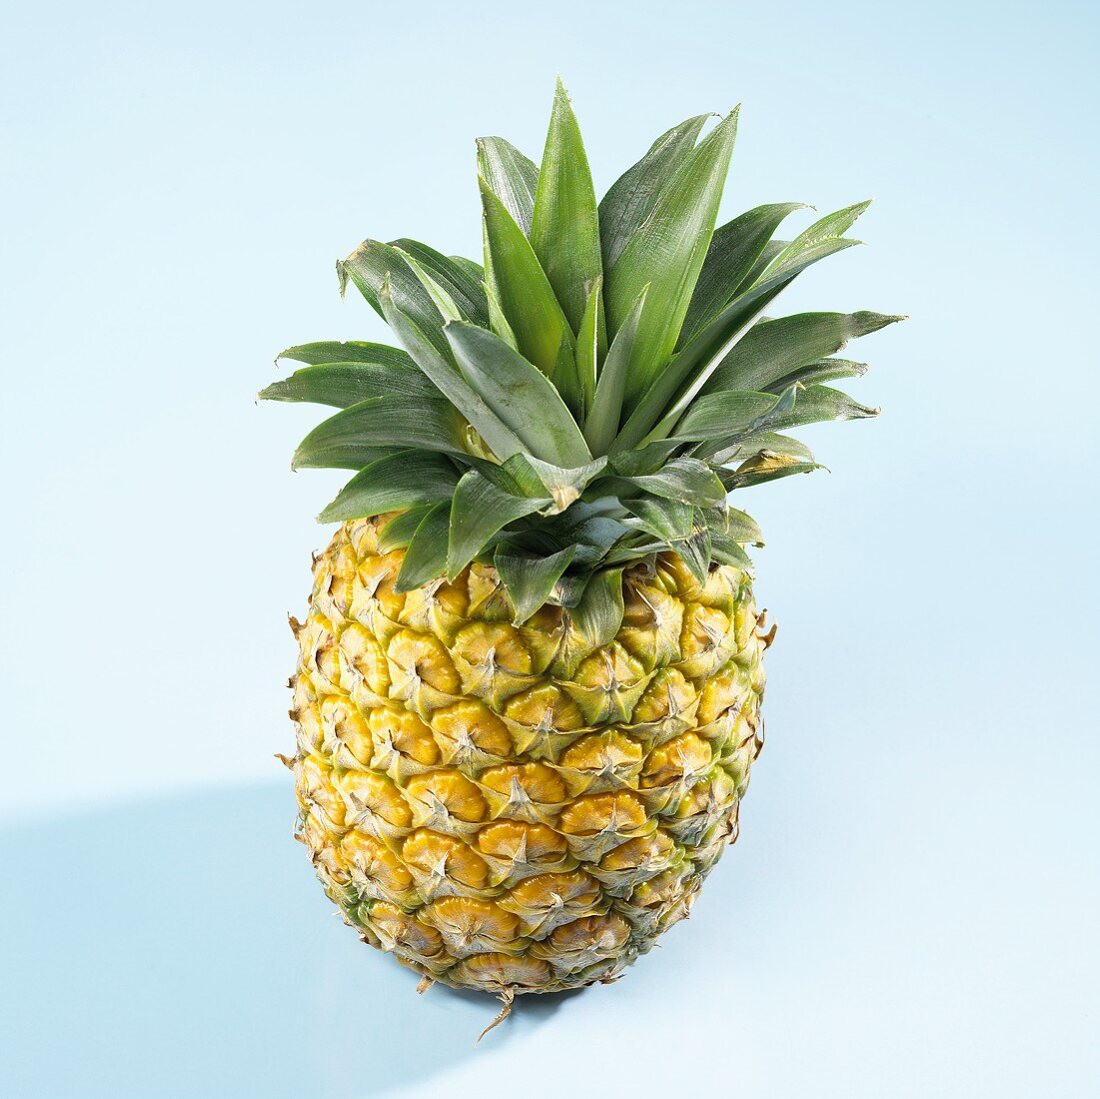 A pineapple from above